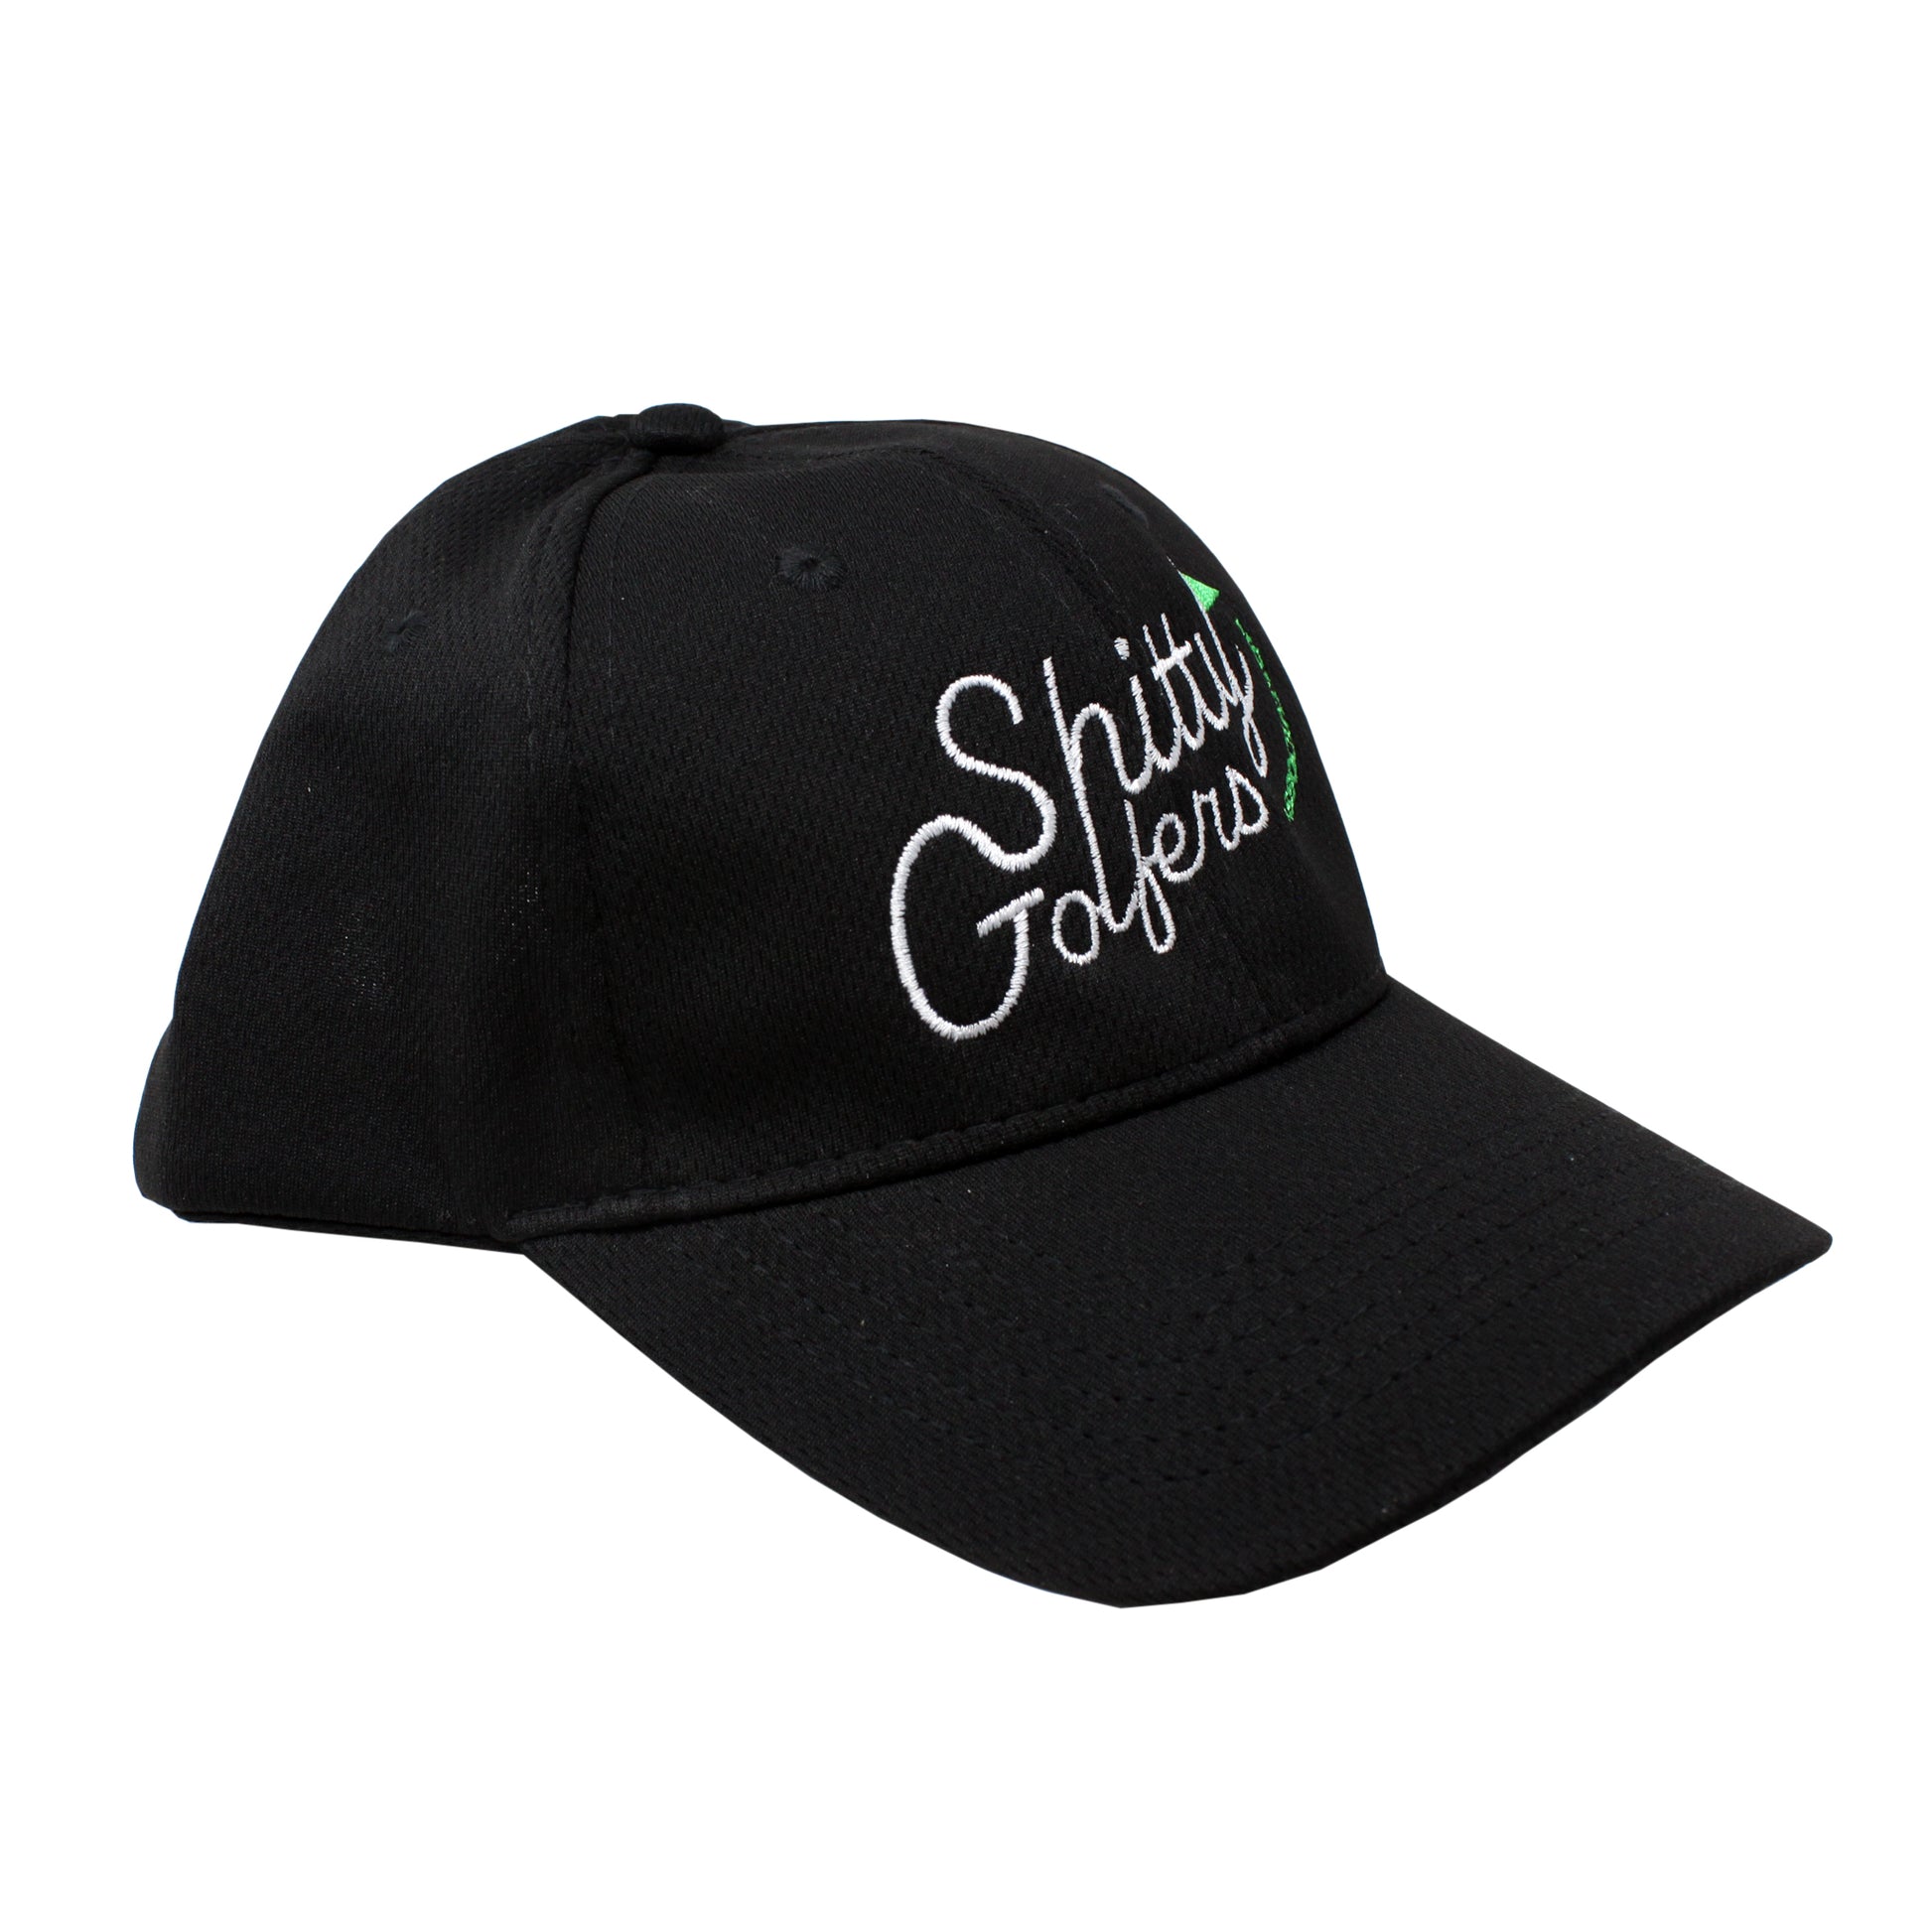 Funny Golf Hats for Men and Women  Humorous Hats for Golfing – Shitty  Golfers Association